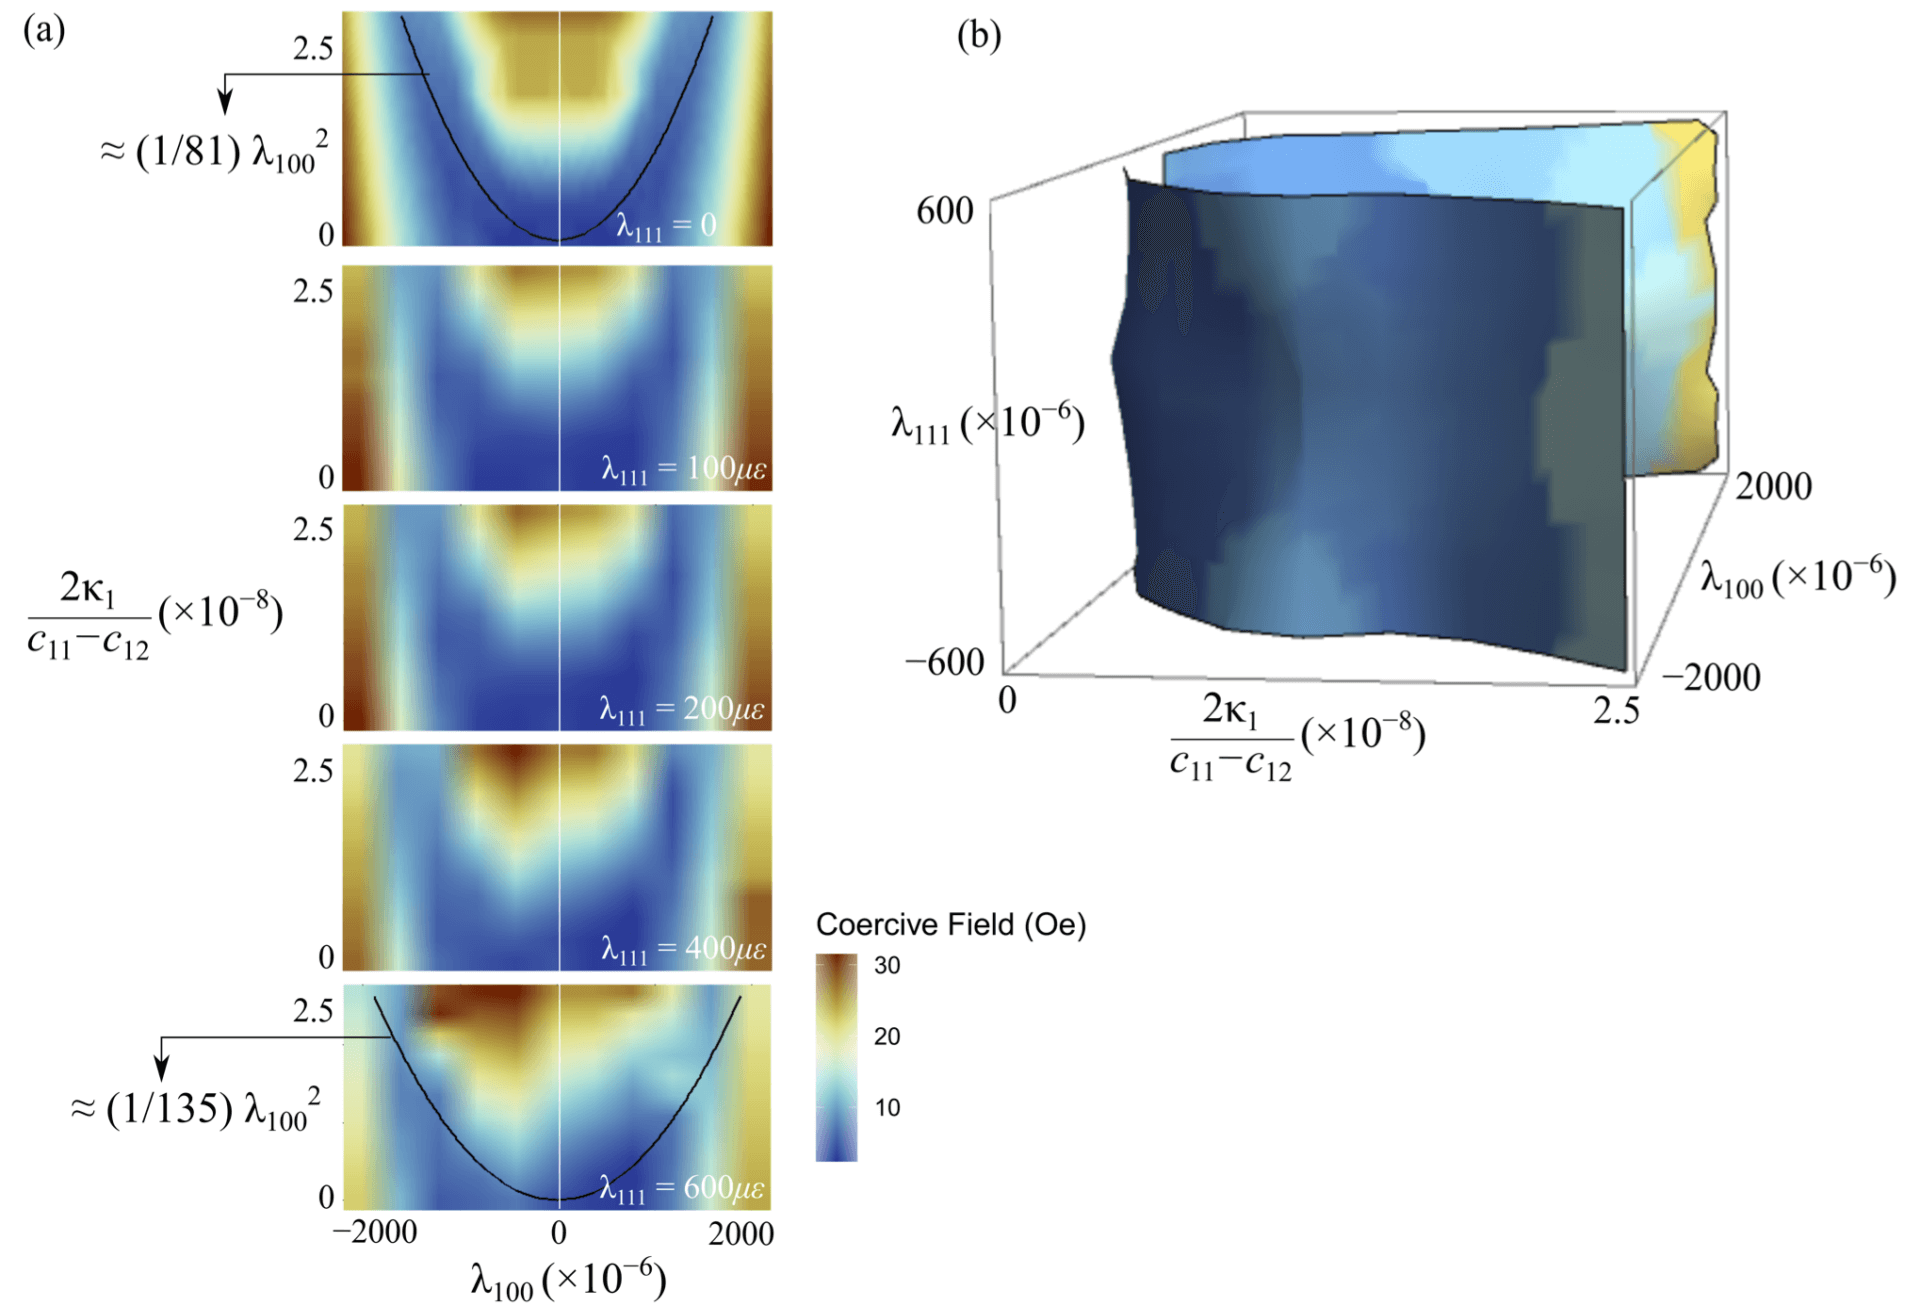 The attached figure shows a parabolic pattern between magnetic constants at which materials have small coercivity. USC Viterbi researchers discovered this pattern by running over 2,500 mathematically rigorous simulations to elucidate this parabolic relationship. IMAGE/ANANYA BALAKRISHNA.